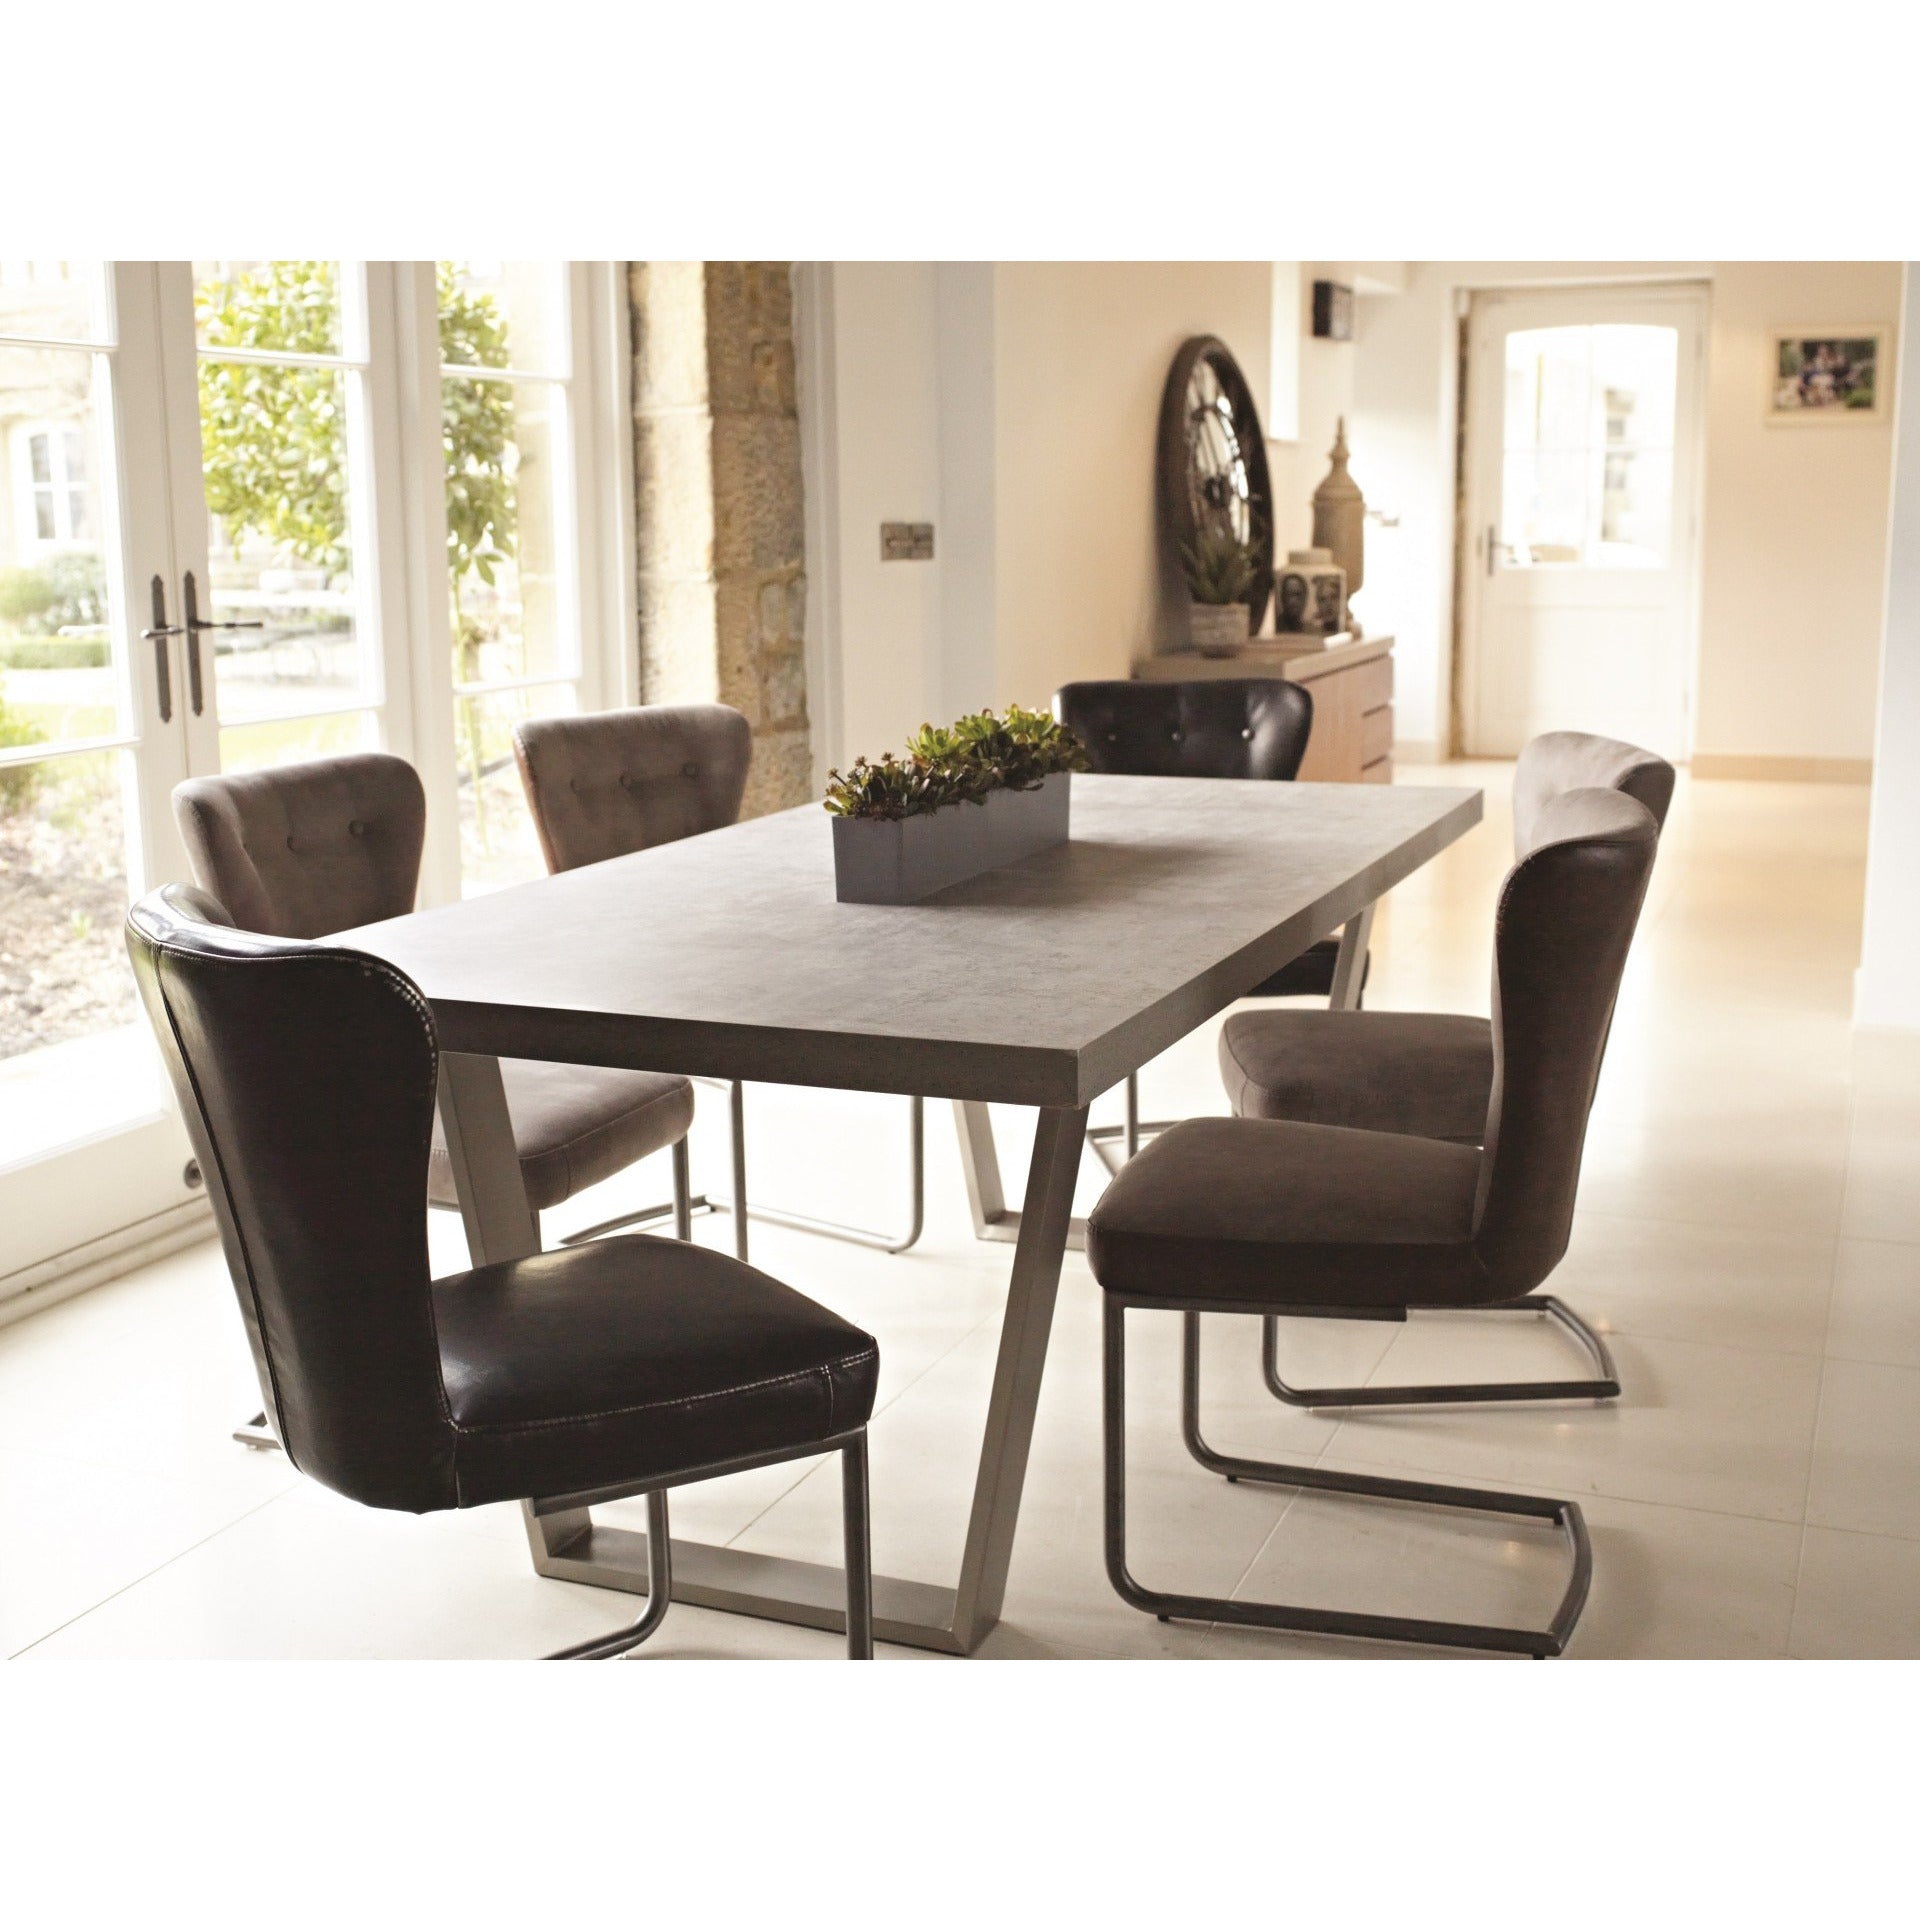 Petra 2m Dining Table from Upstairs Downstairs Furniture in Lisburn, Monaghan and Enniskillen